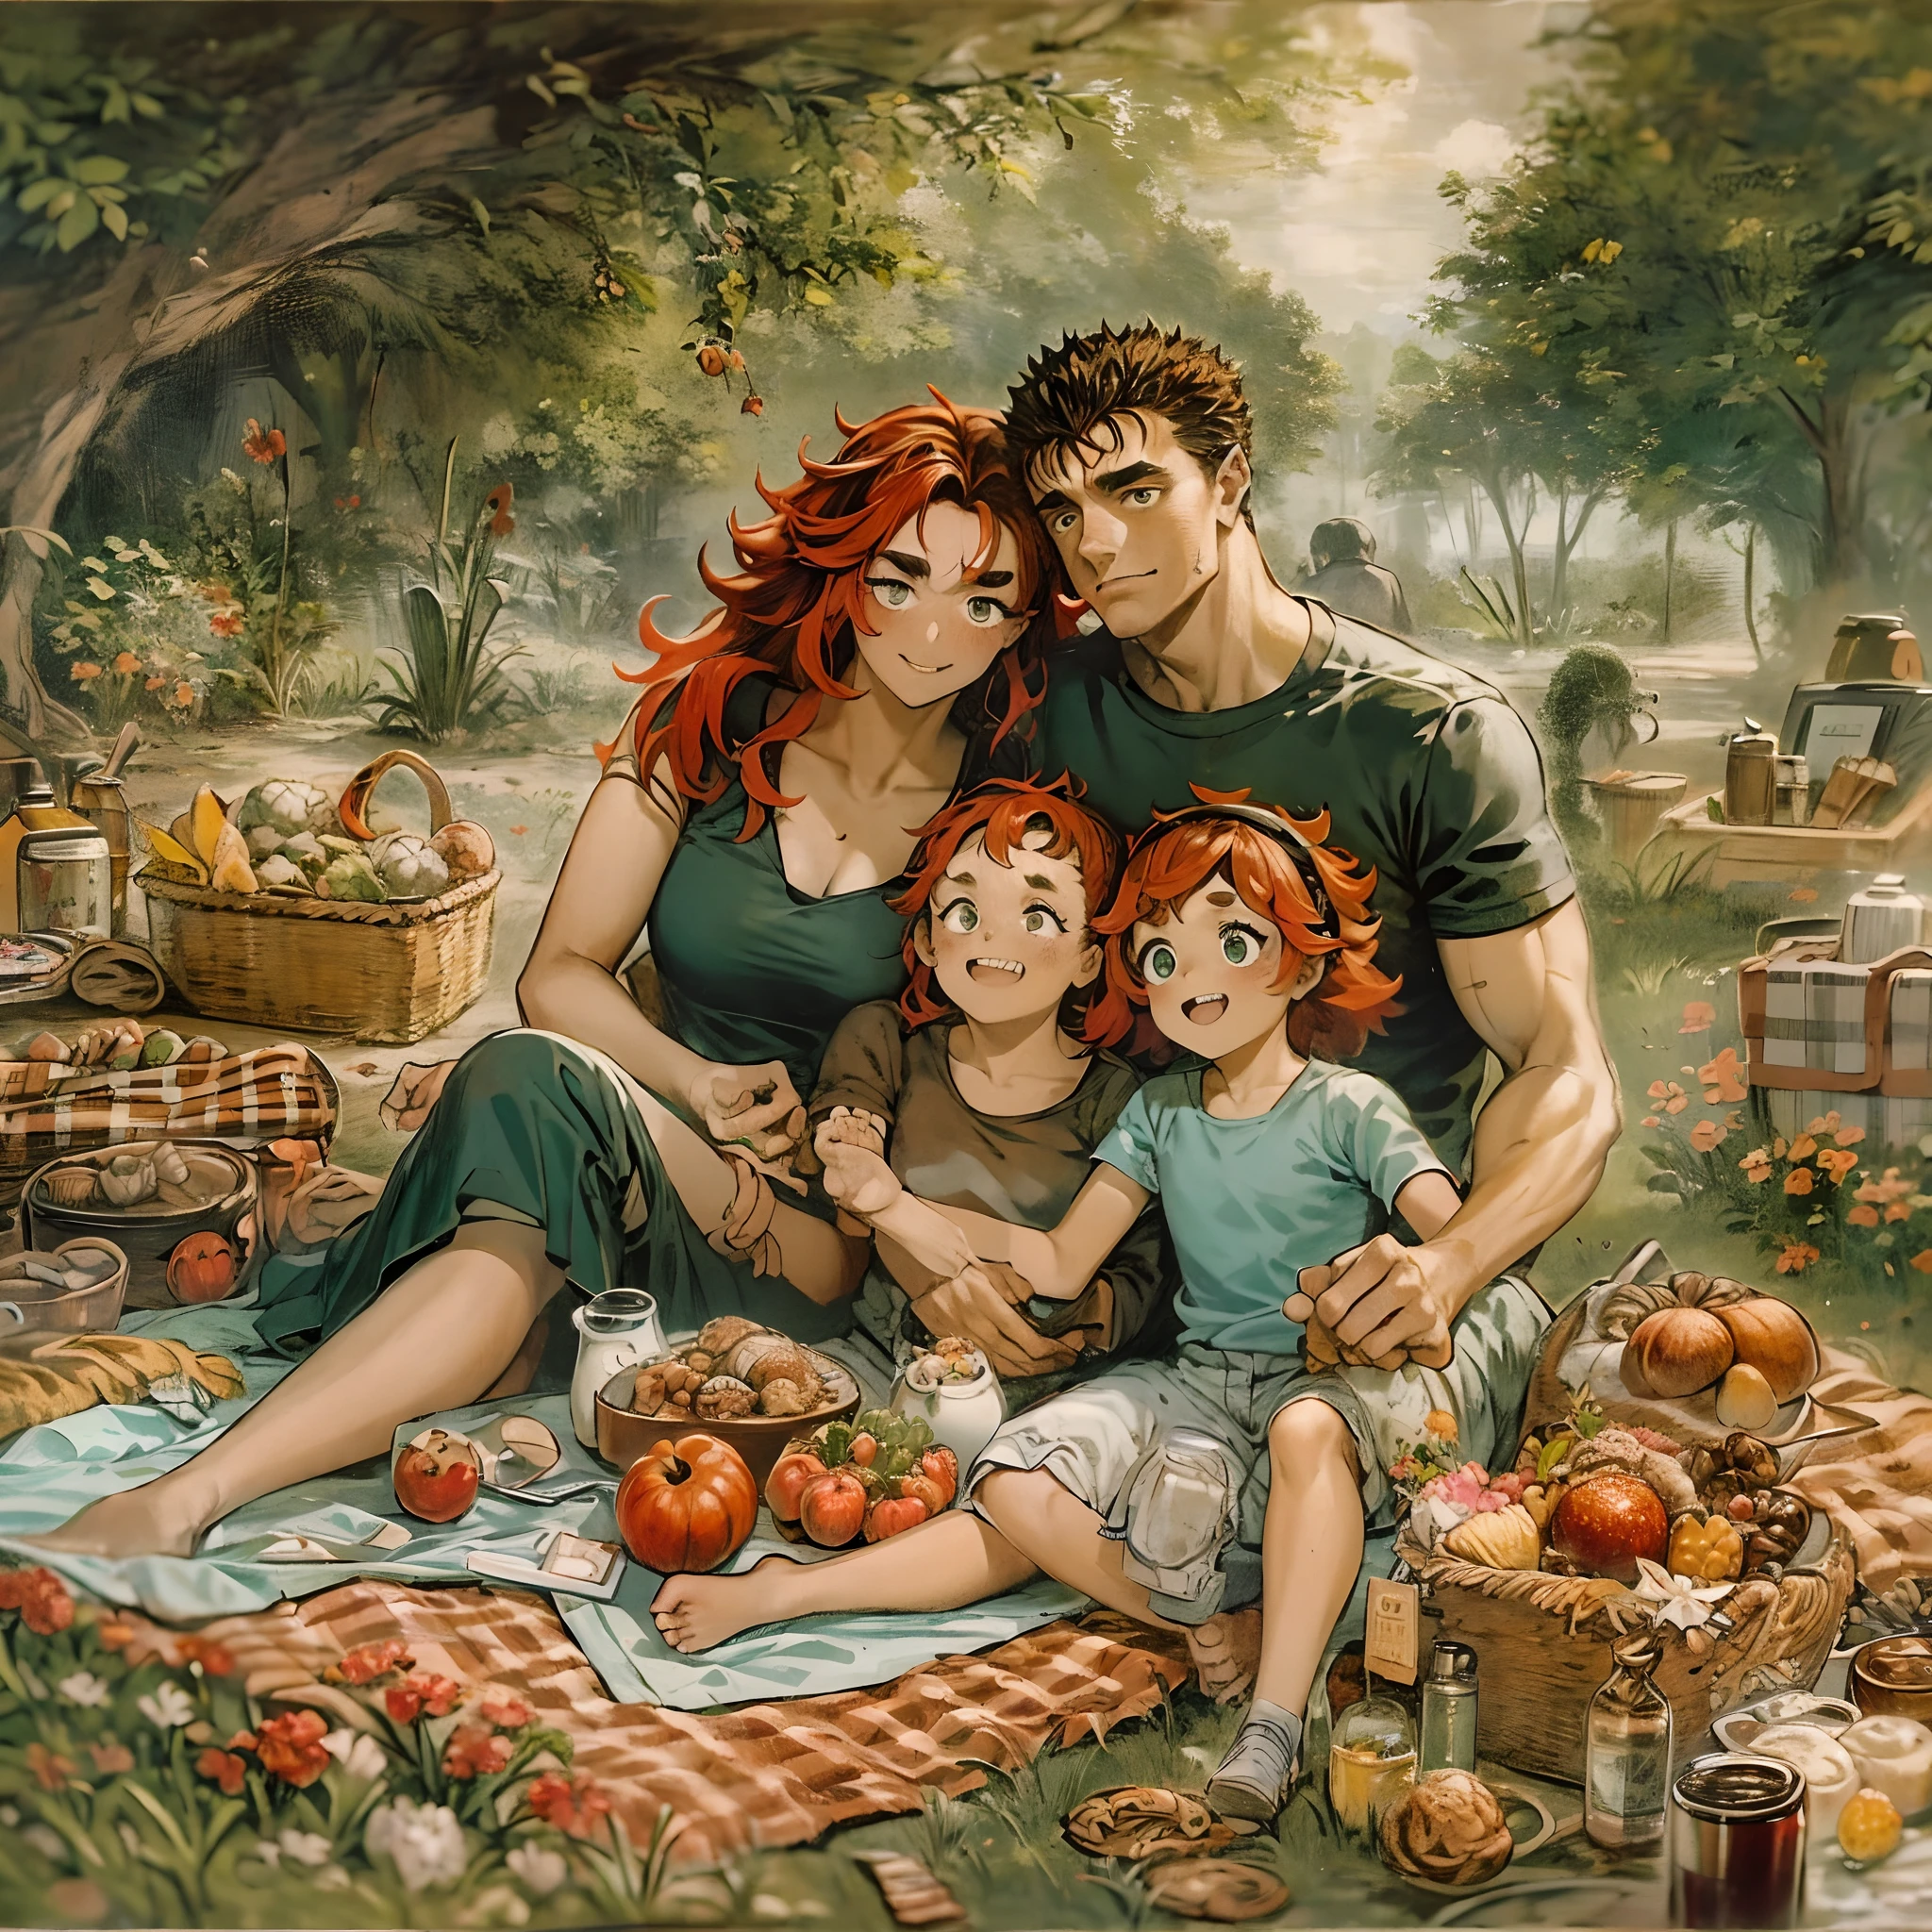 suletta, guts, couple, husband and wife, suletta motherly, wife, mother and son, children , family, happy, red hair suletta, black hair guts, picnic garden